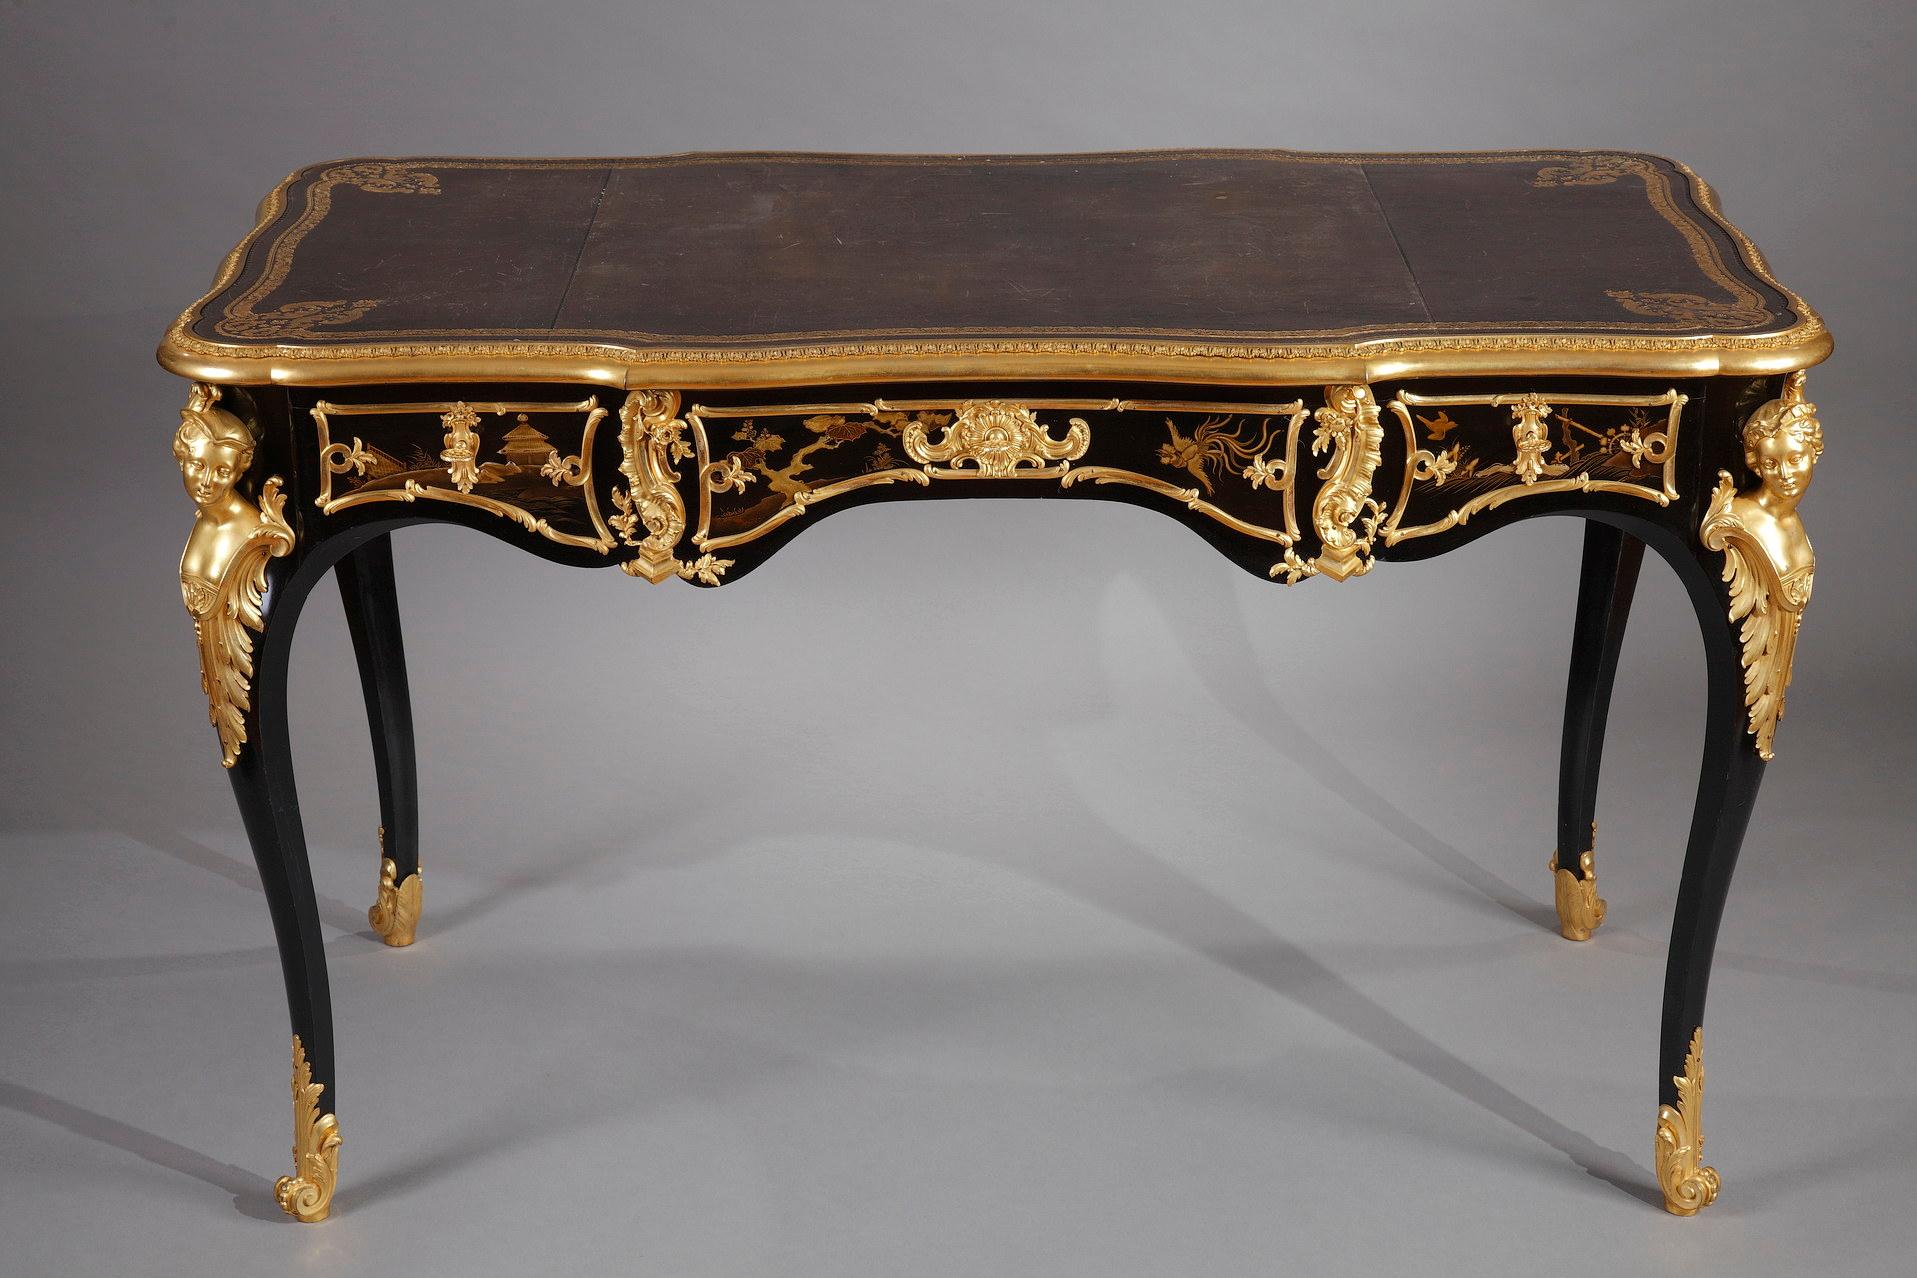 Stamped twice A Beurdeley a Paris on the crosspieces.

Elegant Louis XV style double-side desk in lacquered wood and gilded bronze. It is adorned on all sides, in foliated bronze cartouches, with a decoration of birds and golden landscapes painted